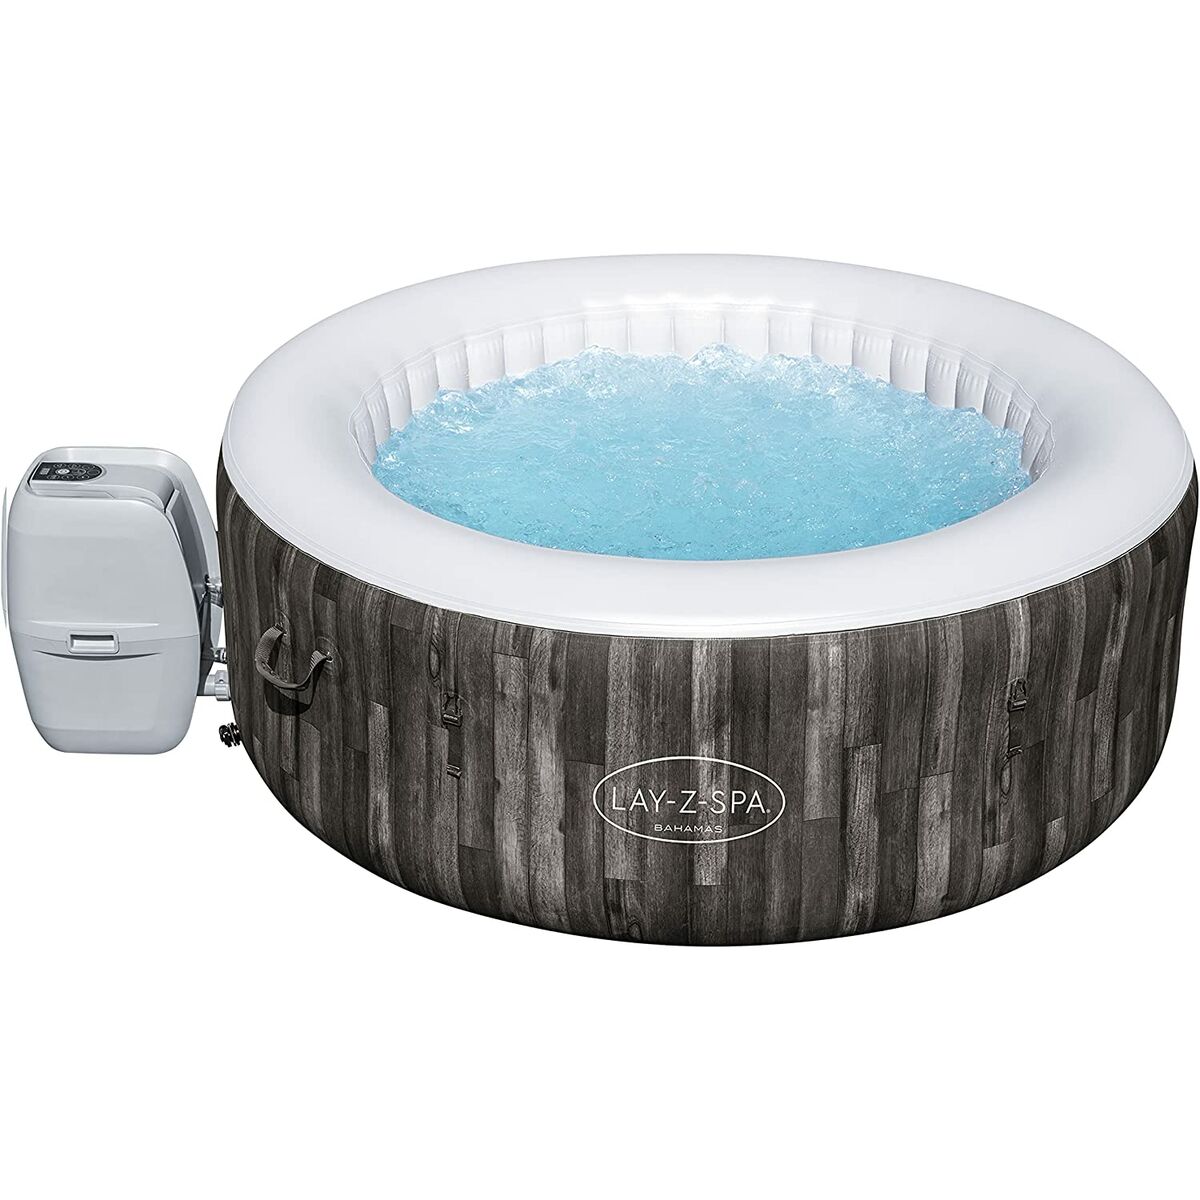 Inflatable Spa Bestway LAY-Z-SPA Bahamas 4 persons 669 L